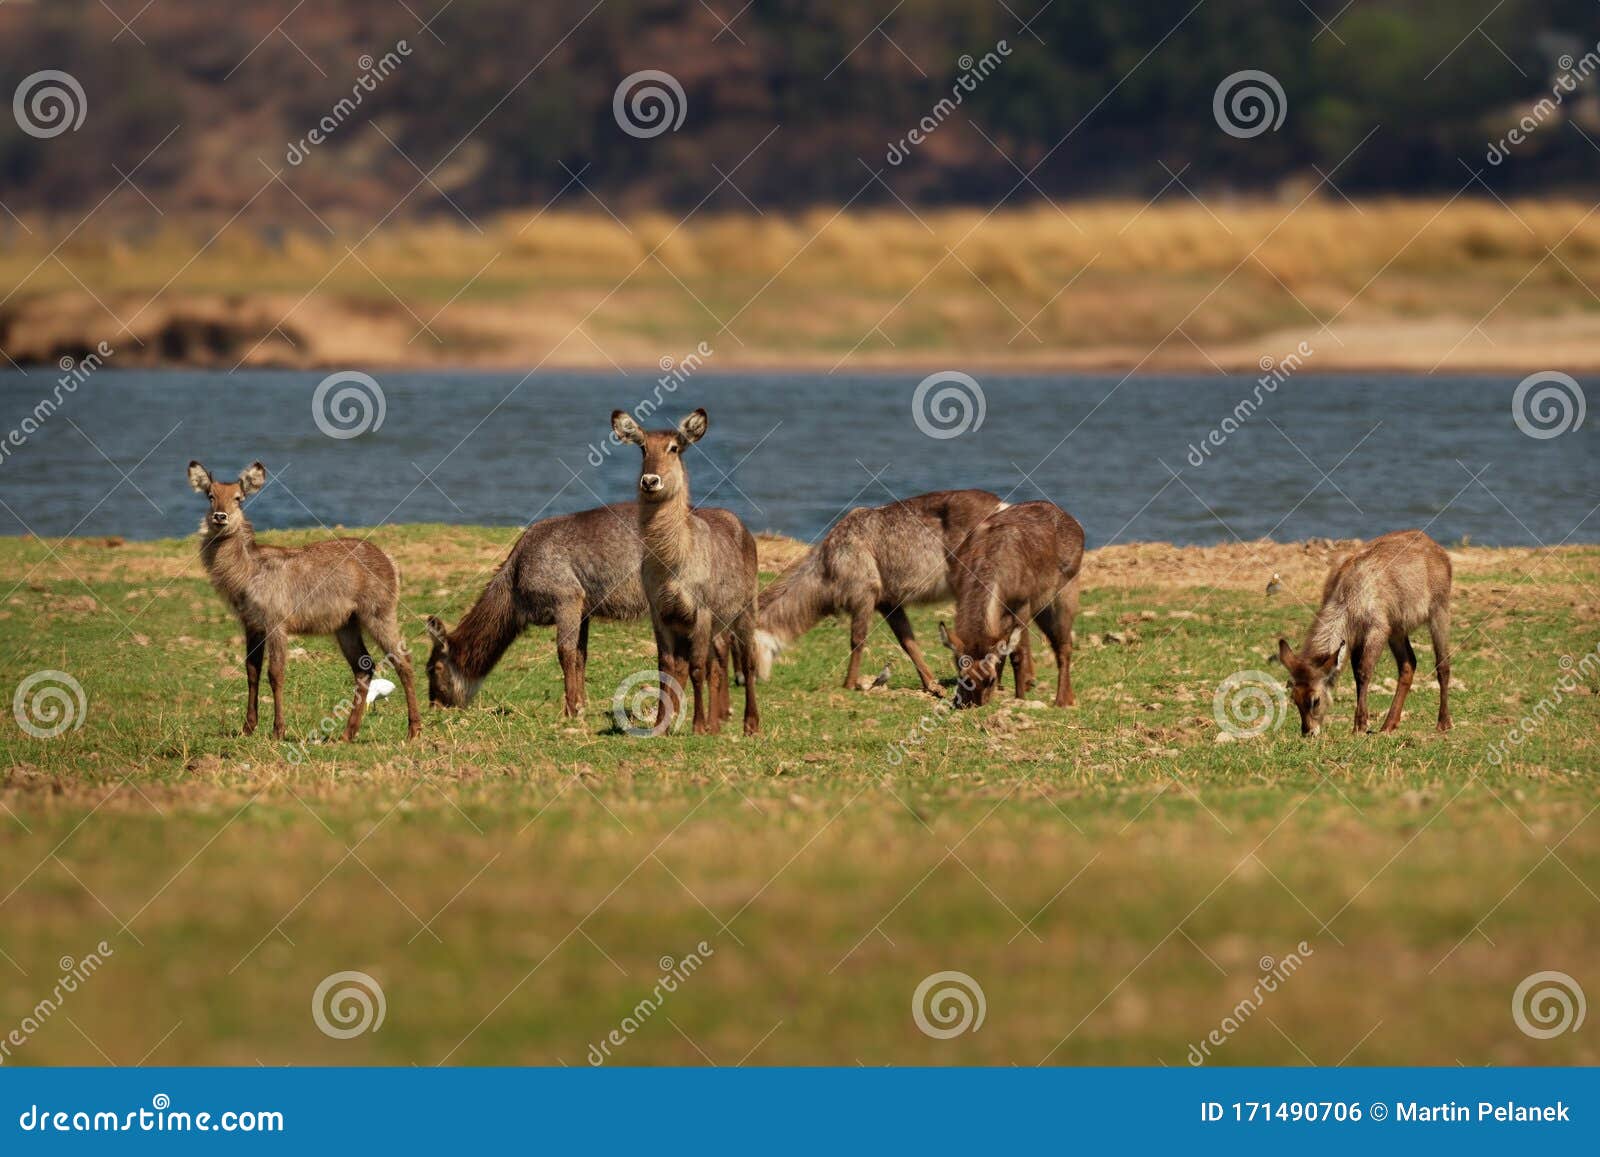 waterbuck - kobus ellipsiprymnus  large antelope found widely in sub-saharan africa. it is placed in the family bovidae. herd of